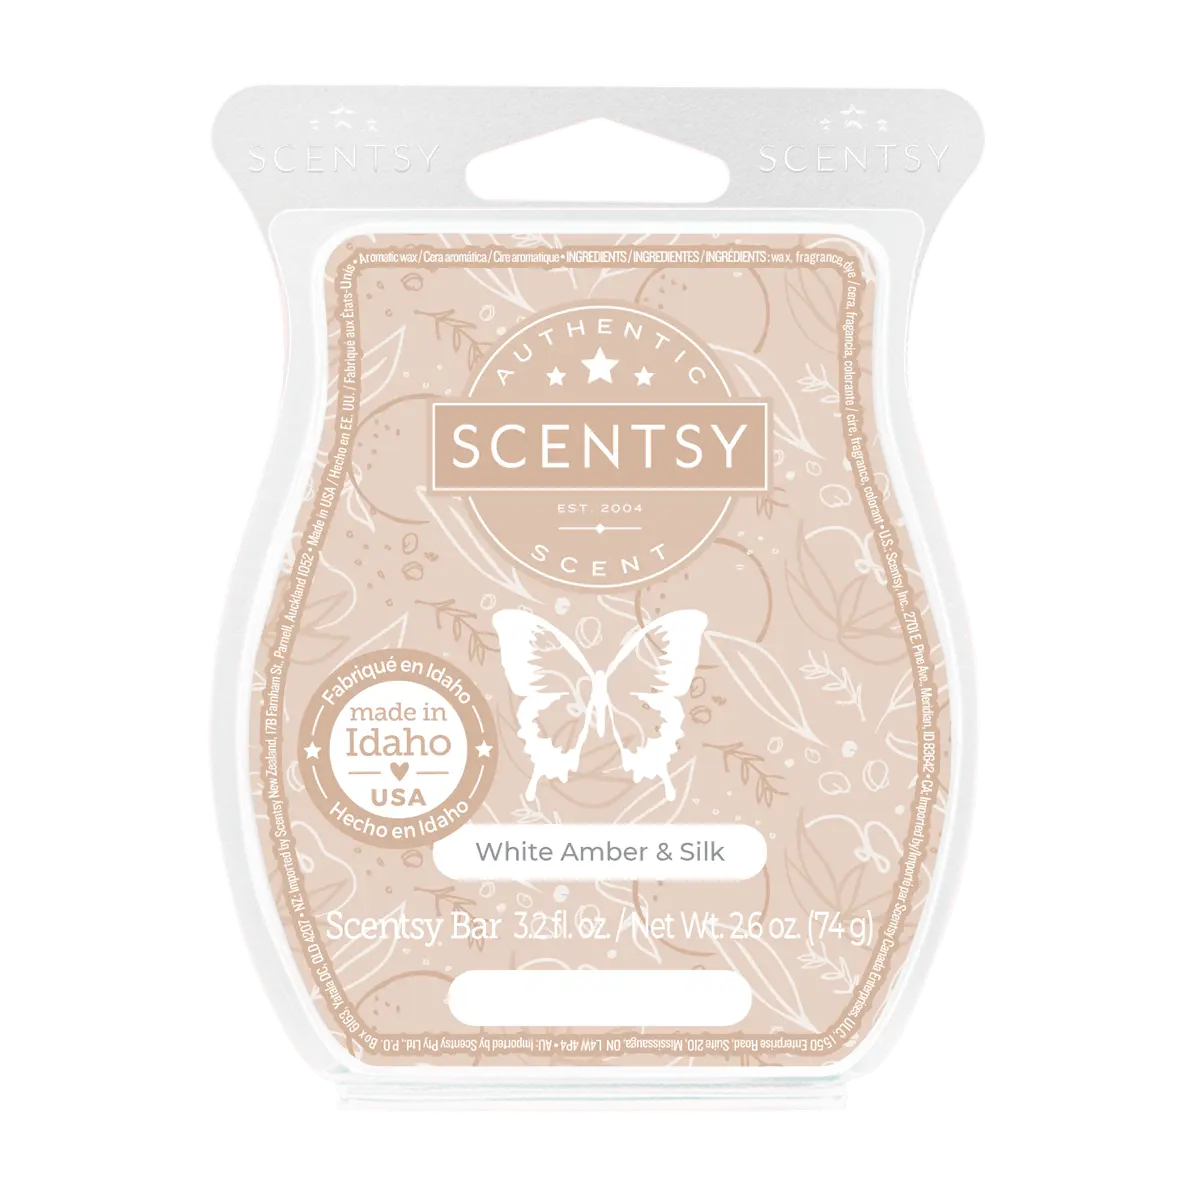 Everything you want to know about Scentsy Bars